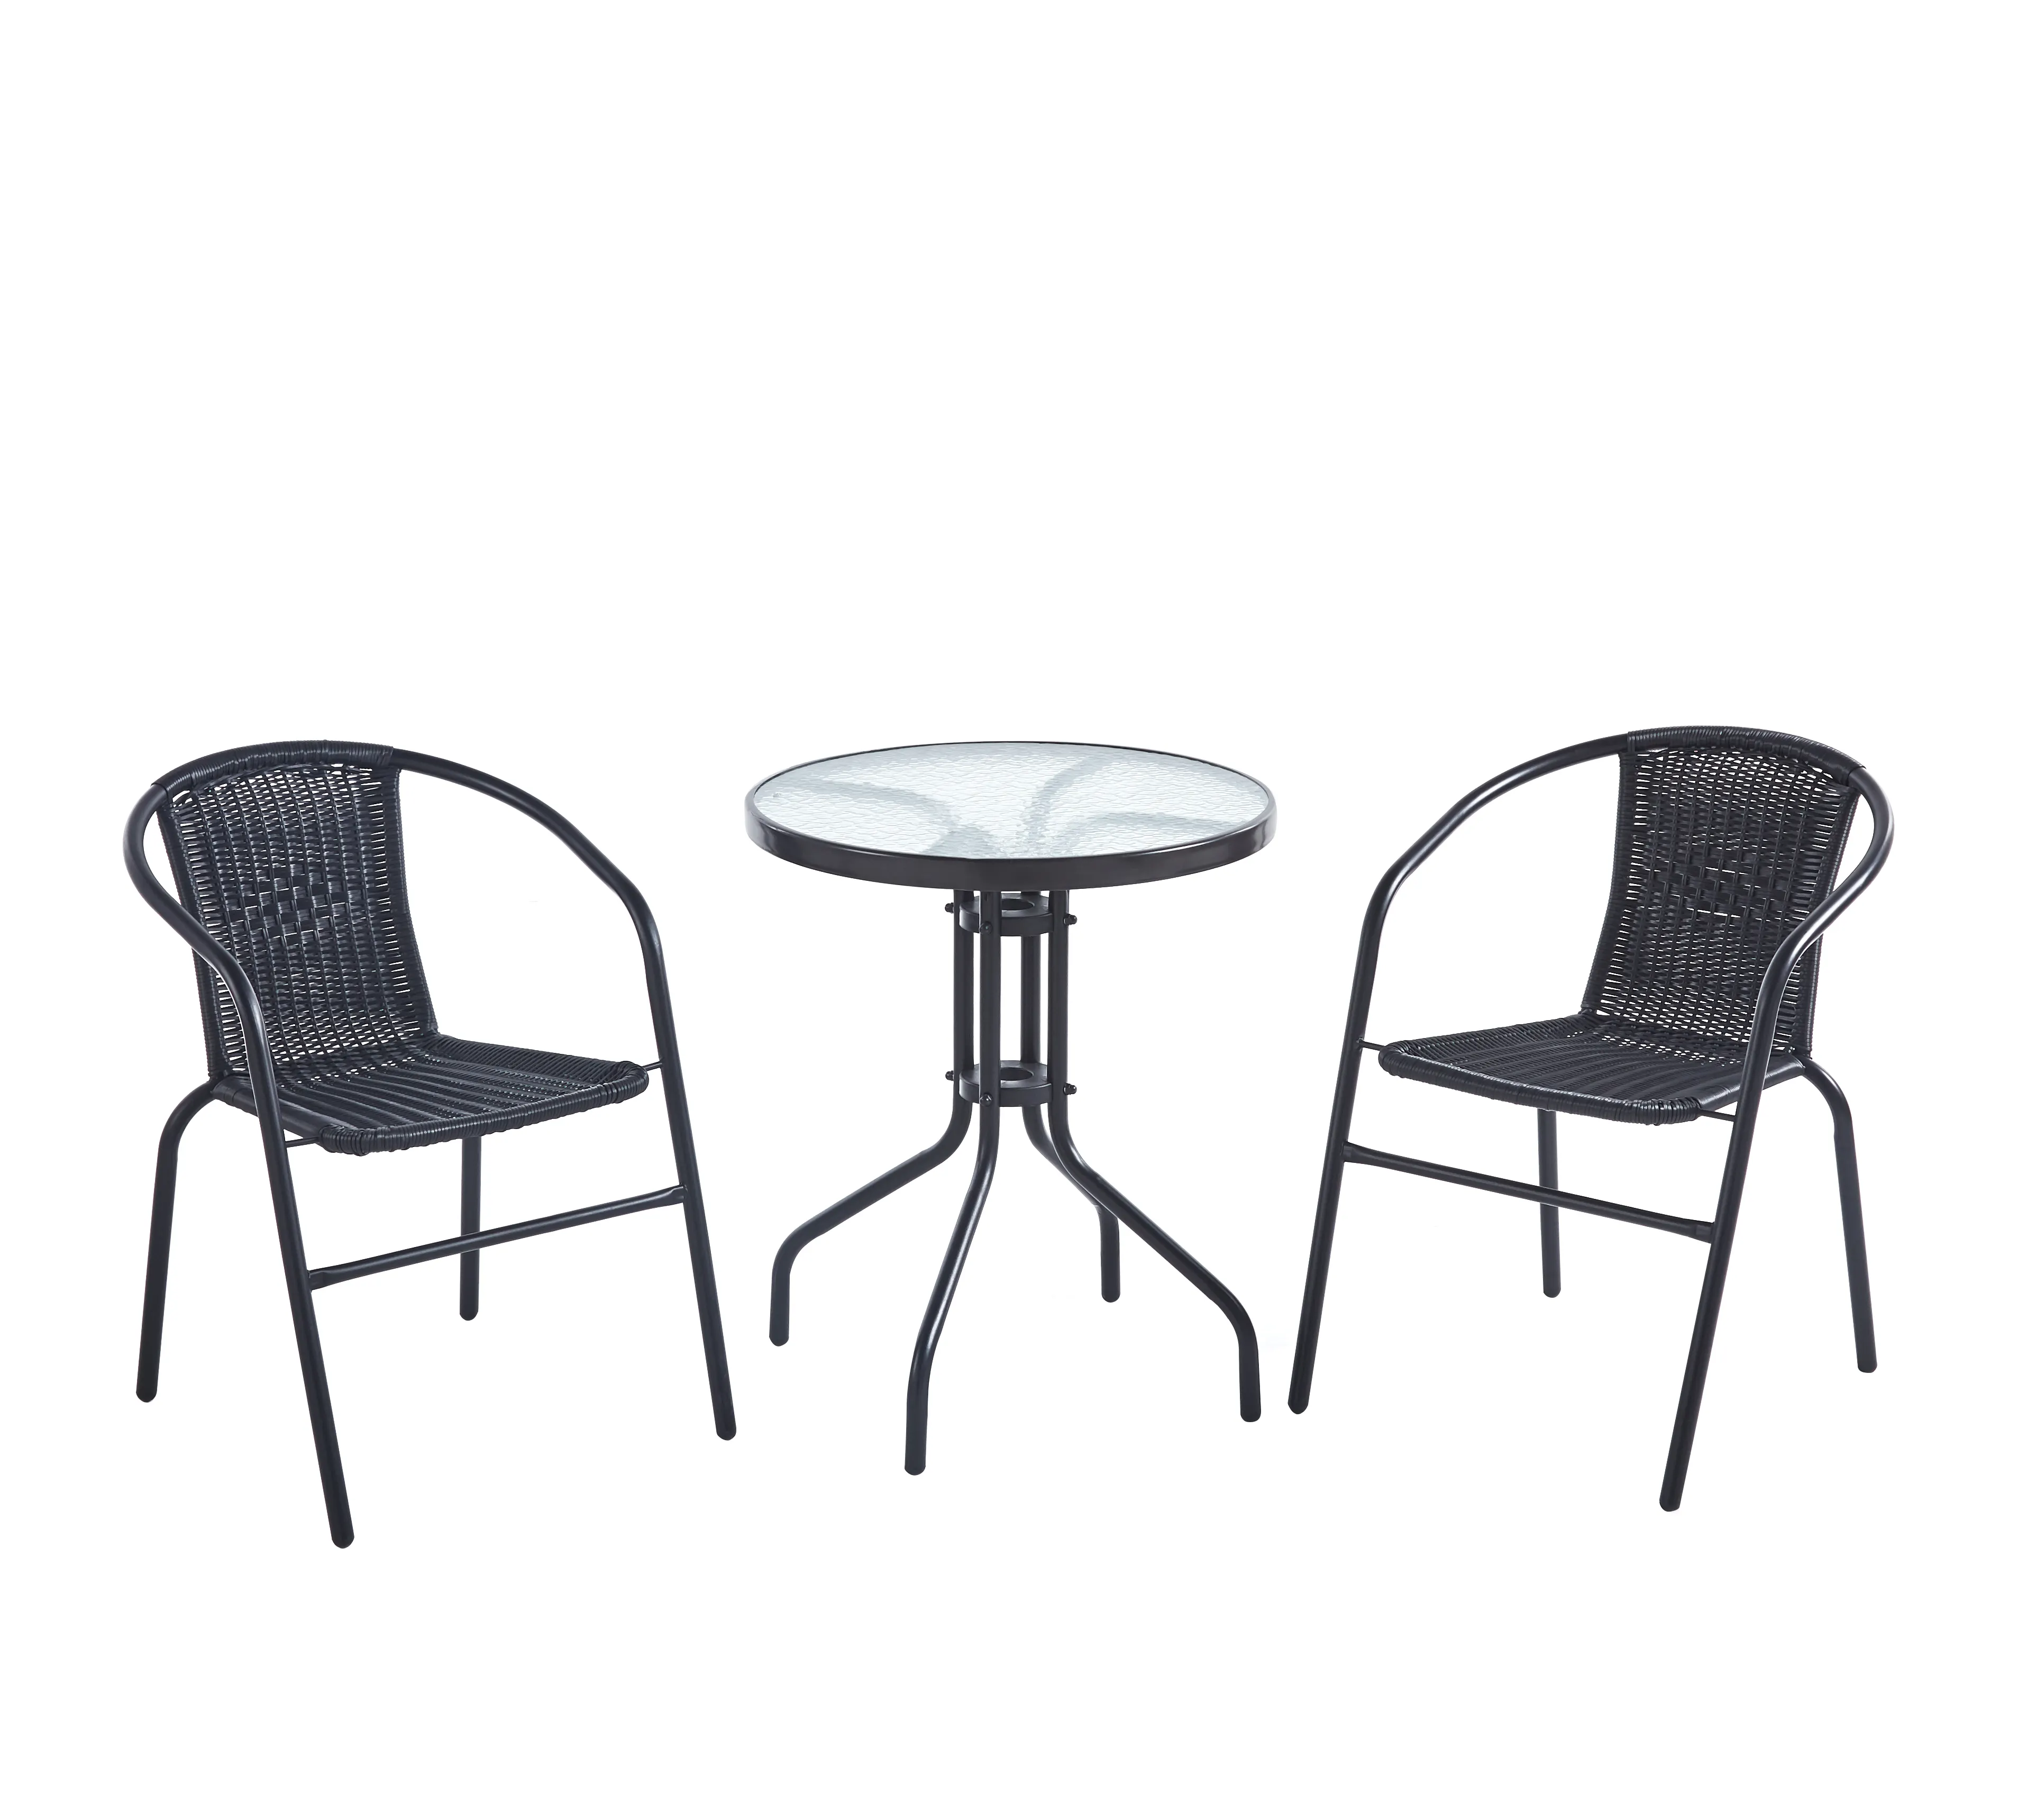 Modern Style Garden Sets Outdoor Furniture Rattan Material Dining Garden Sets With Steel Frame